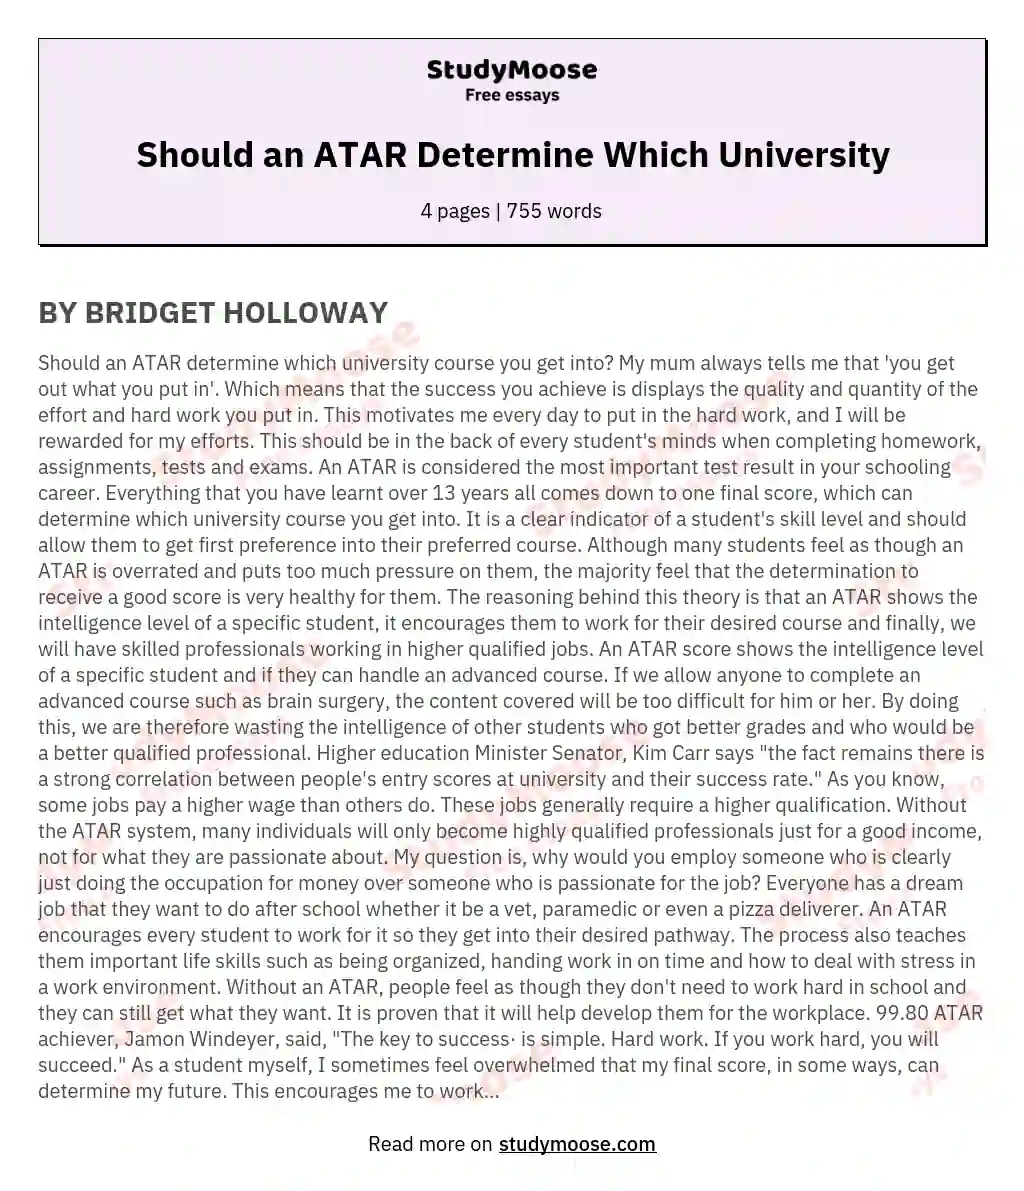 Should an ATAR Determine Which University essay